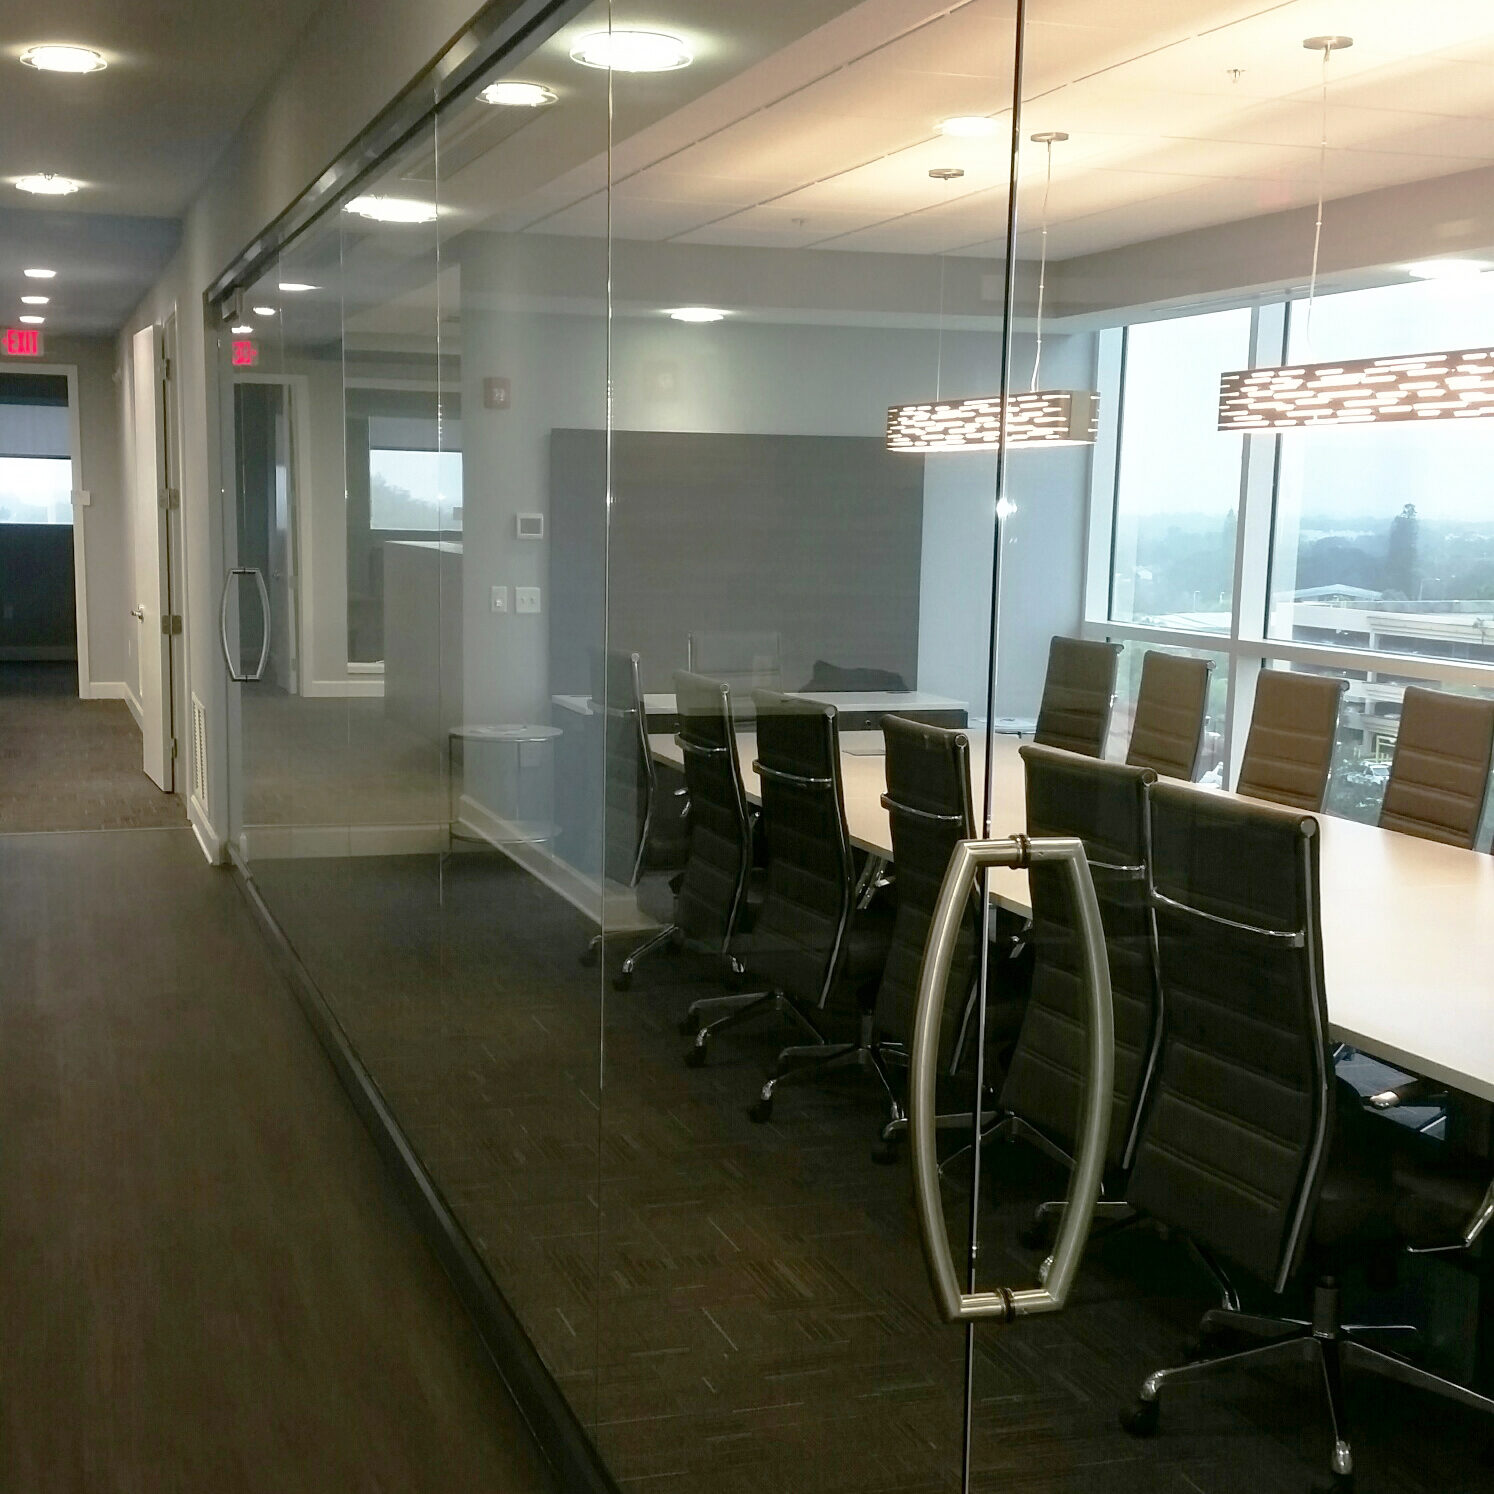 Lemon Bay Glass - glass conference room - room with view